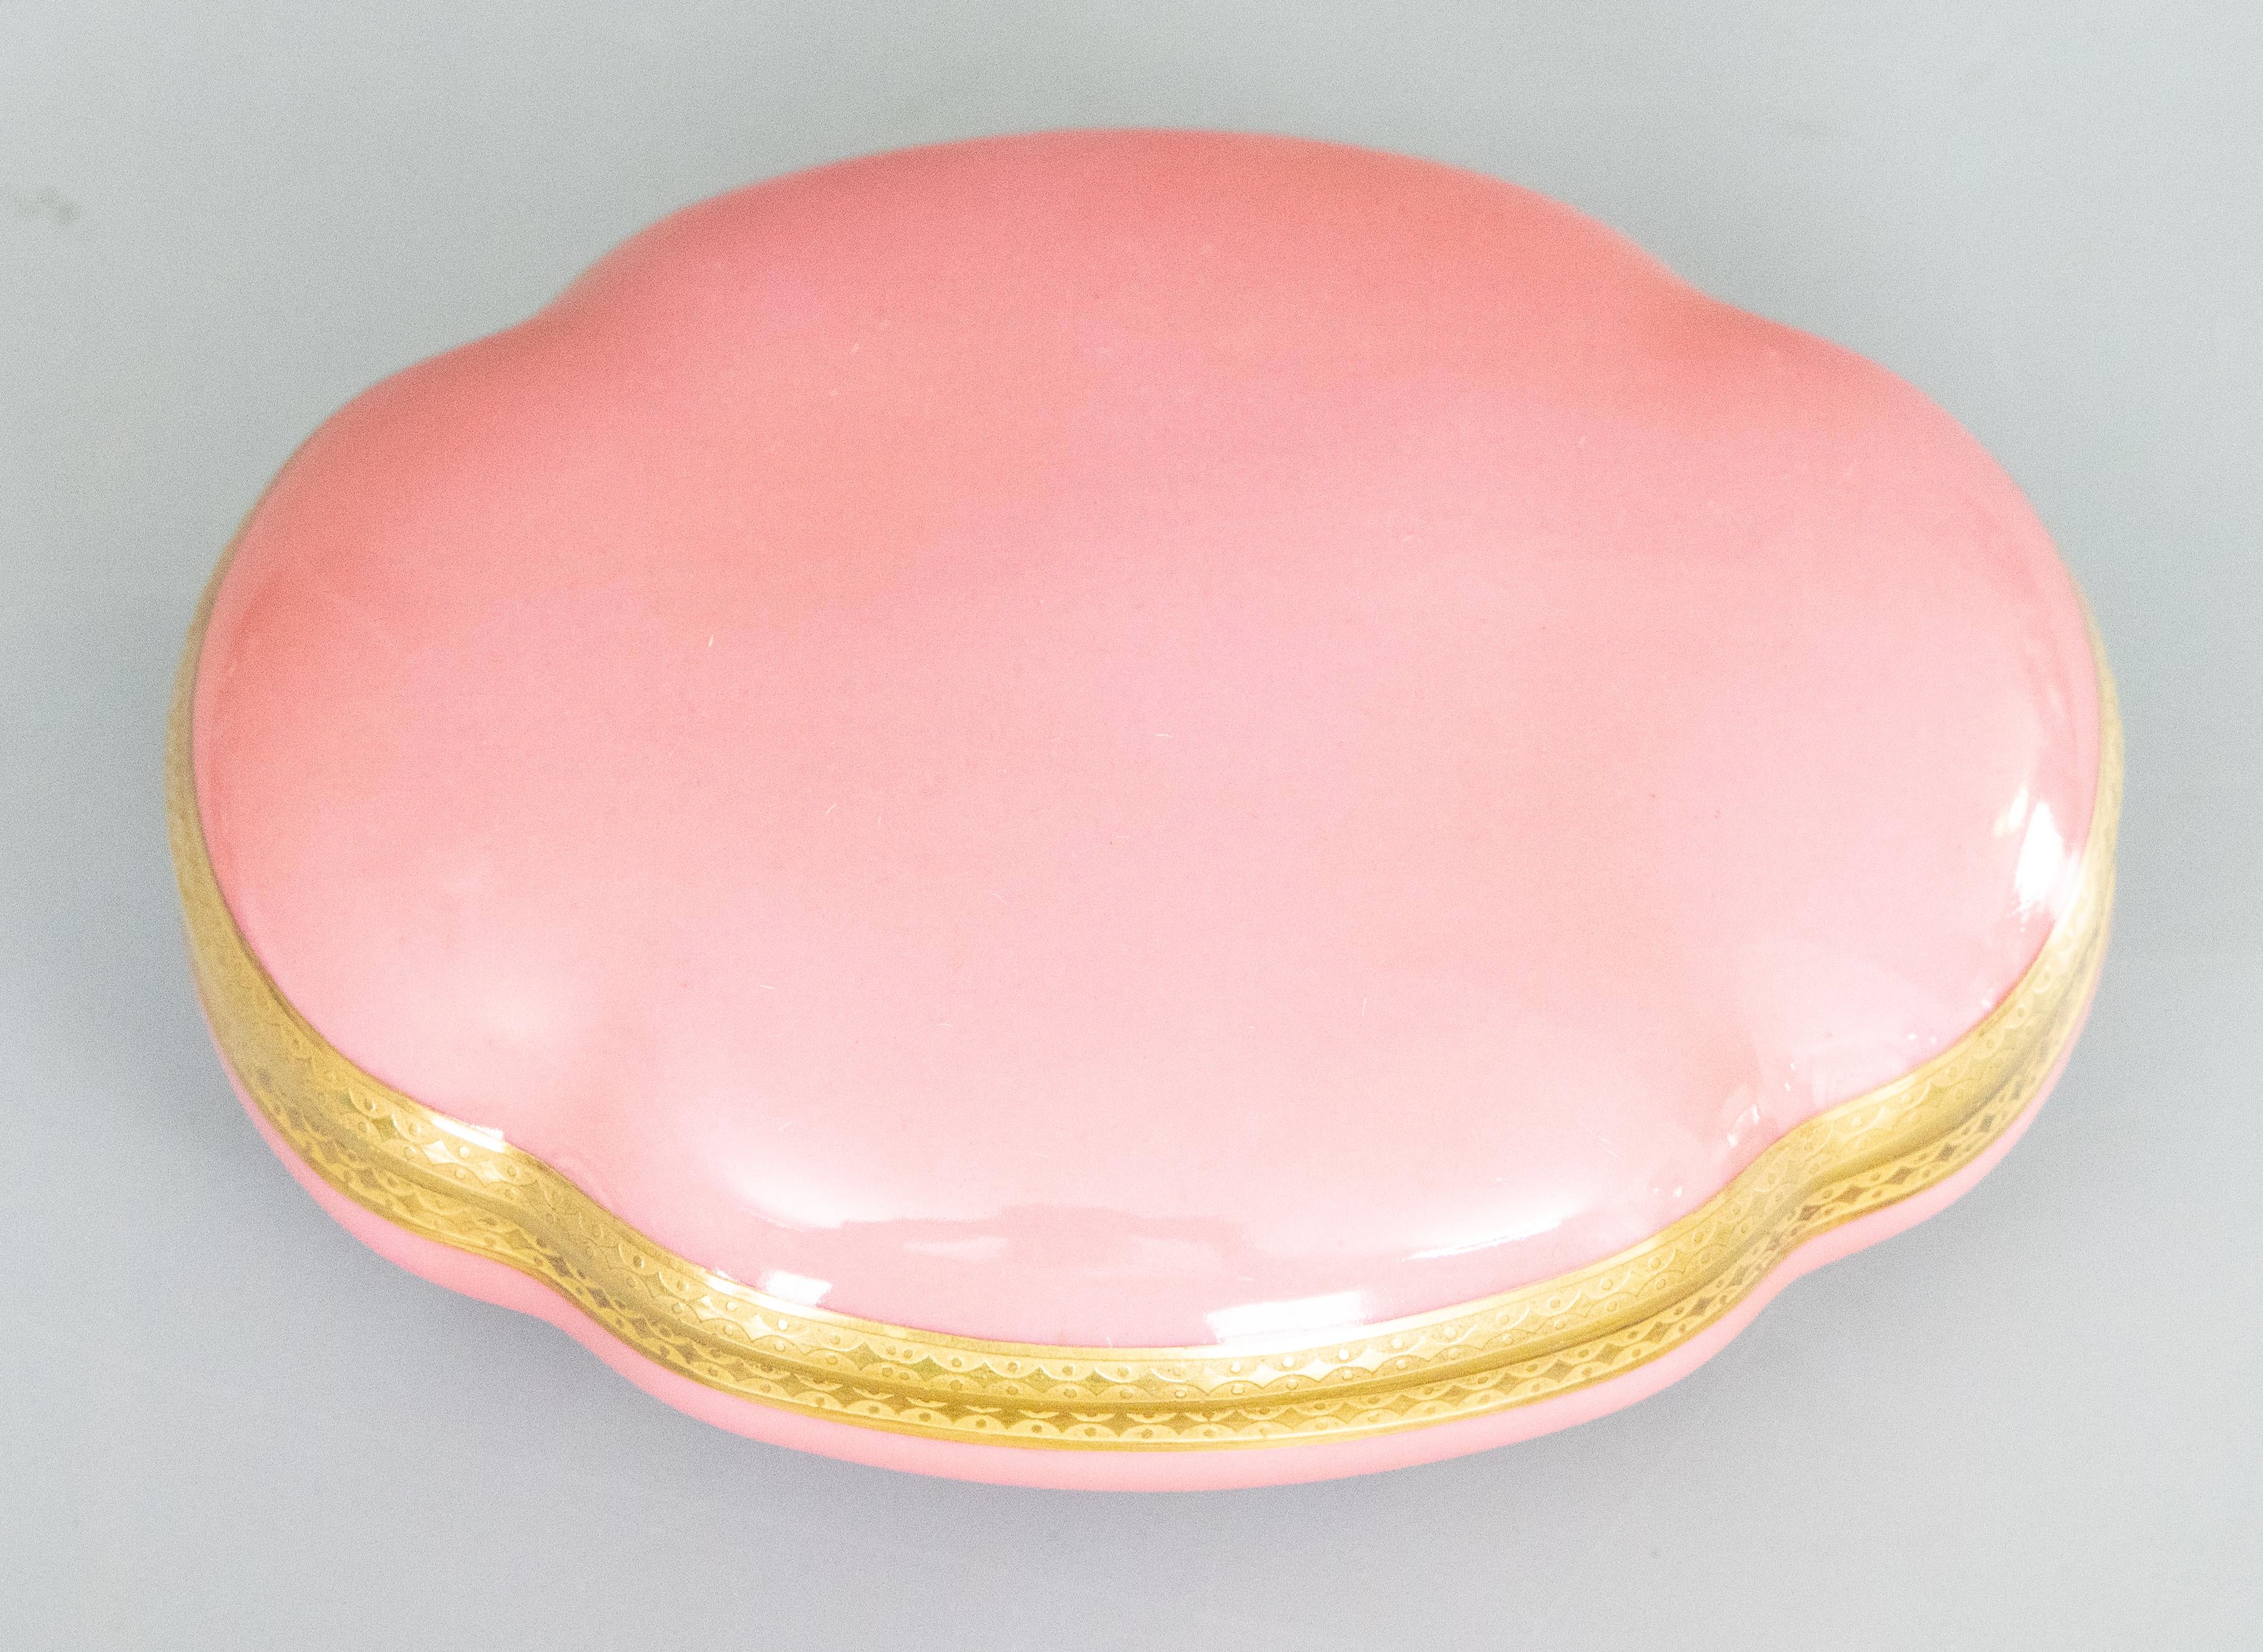 Early 20th Century French Limoges Pink Gilt Porcelain Jewelry Box For Sale 1